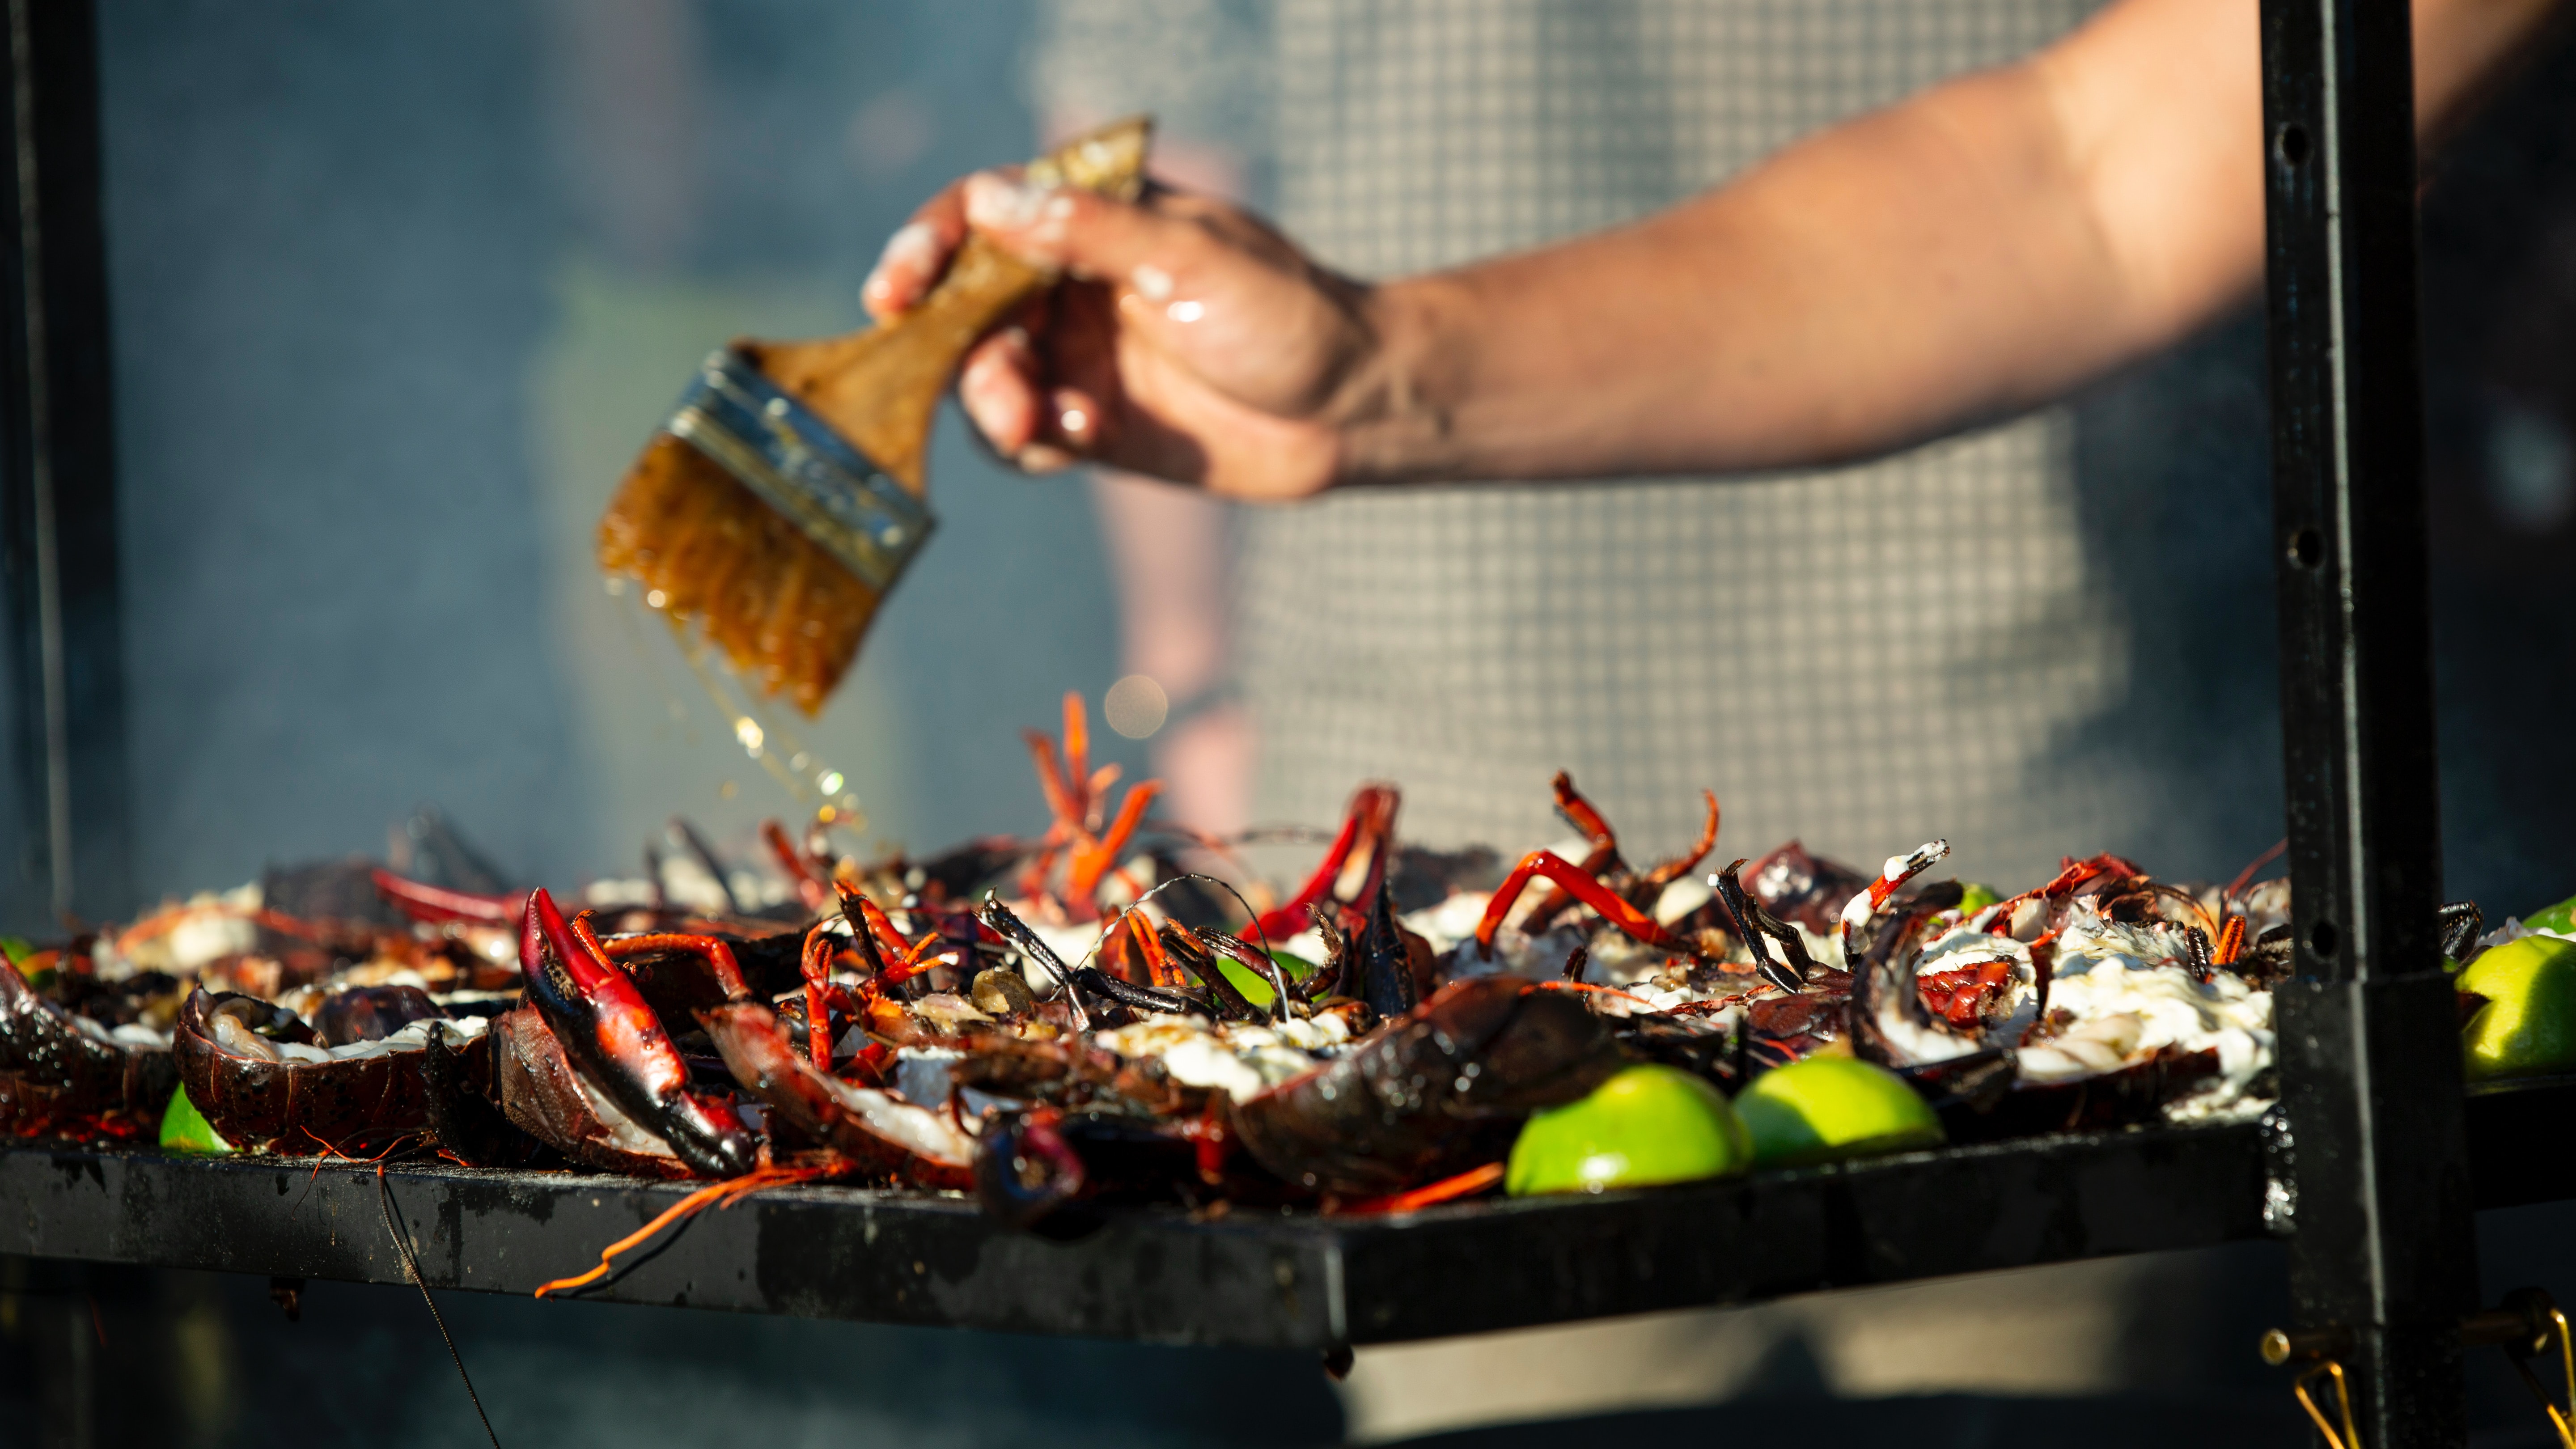 Crabs on grill | Dartmoor Place